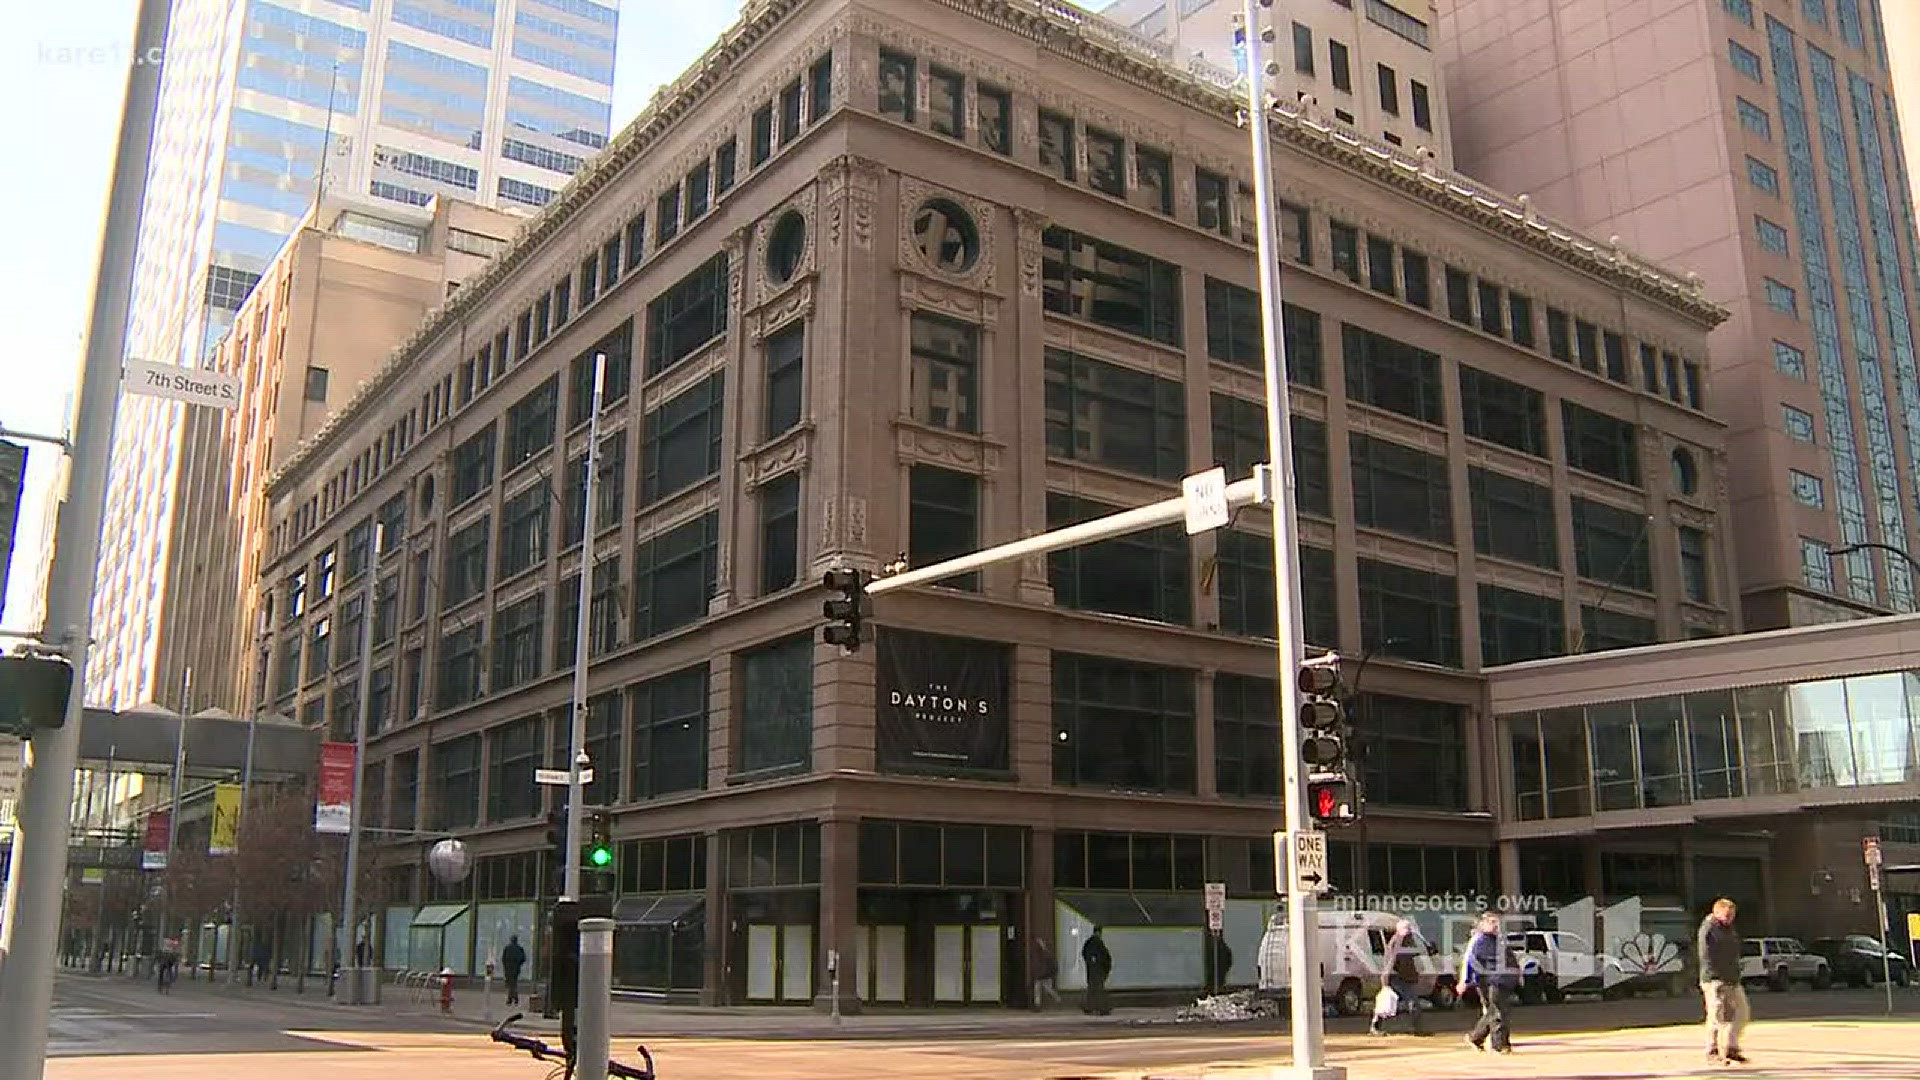 A progress report on the renovation of the downtown Minneapolis Dayton's building.